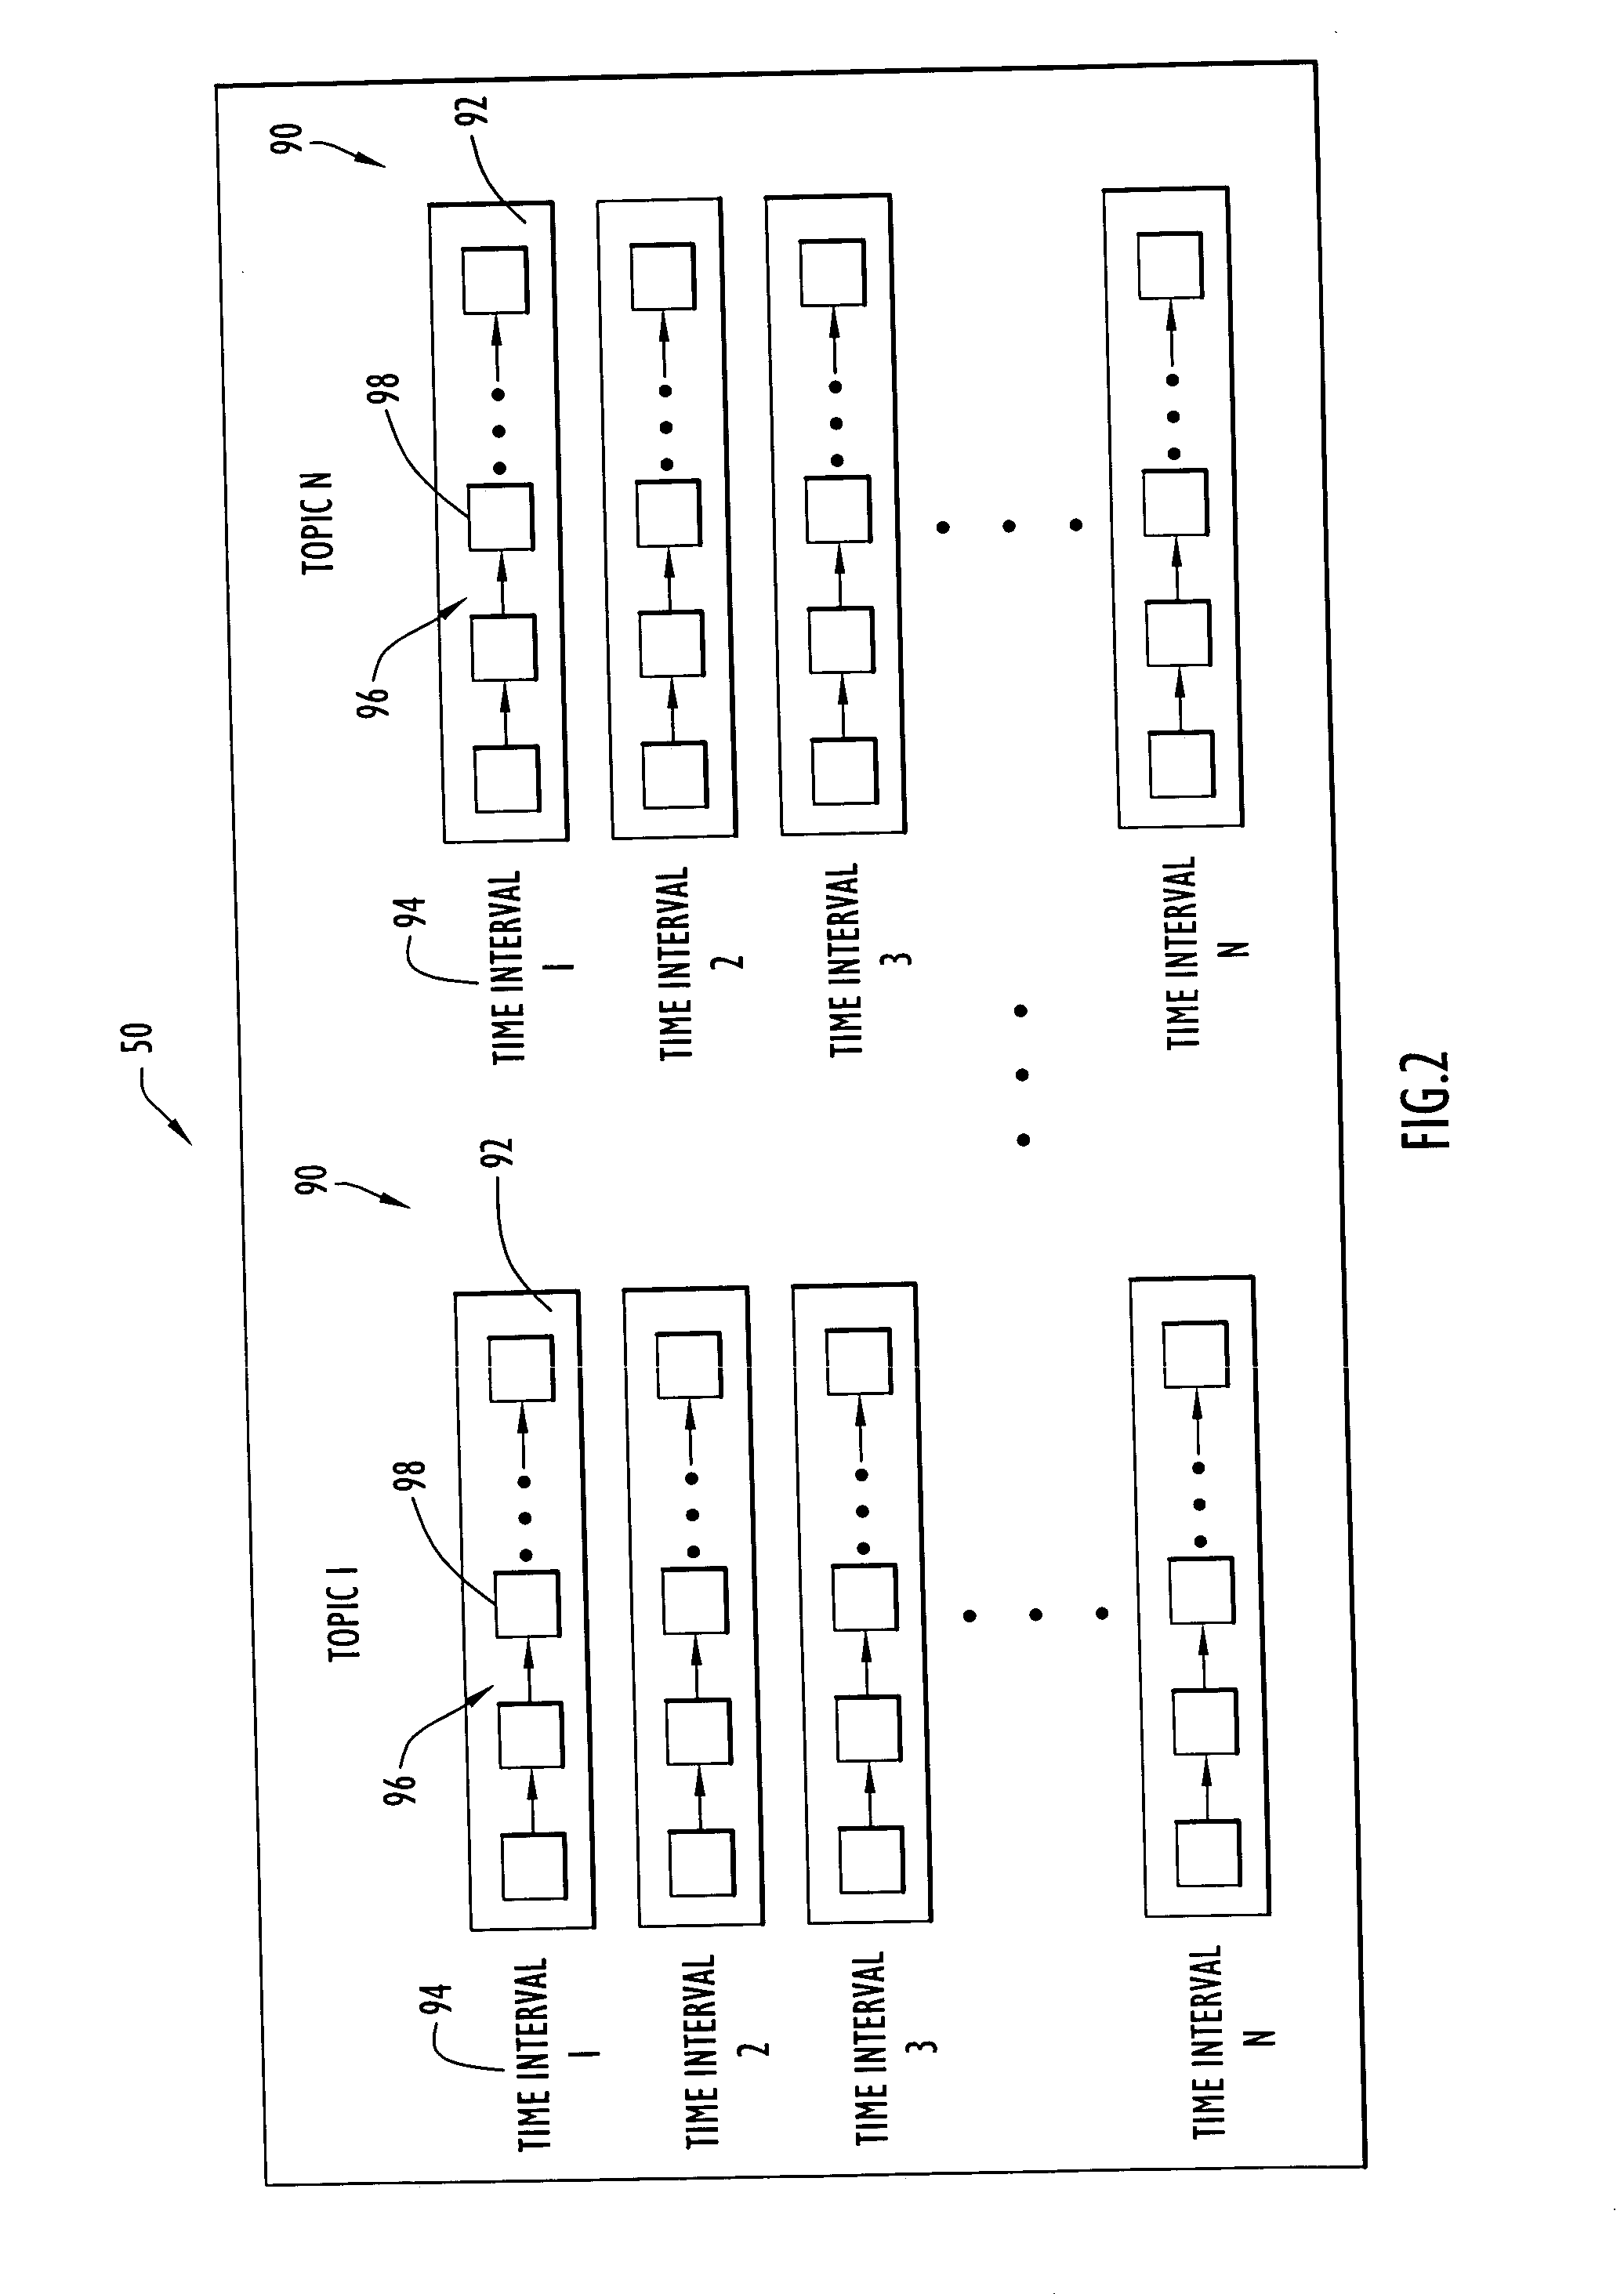 Memory management system and method for storing and retrieving messages